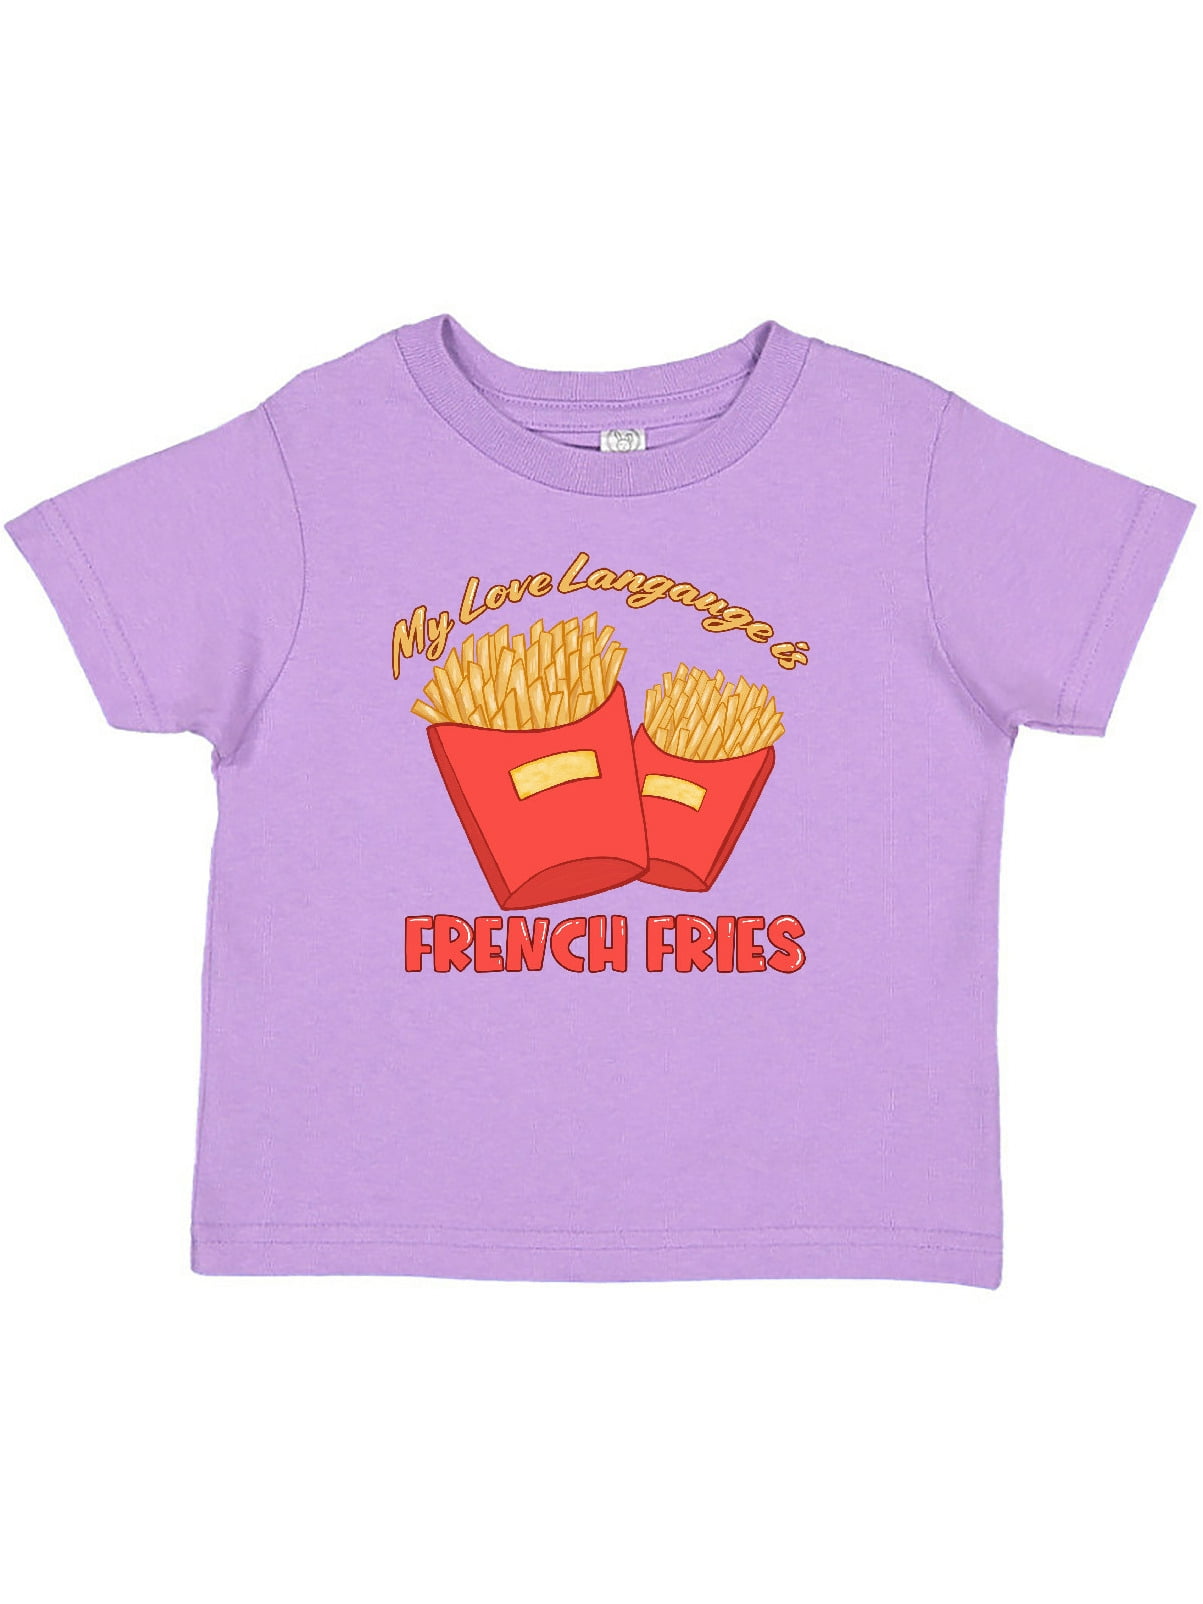 My Mimi Loves Me More Than Fries Toddler/Kids Short Sleeve T-Shirt 